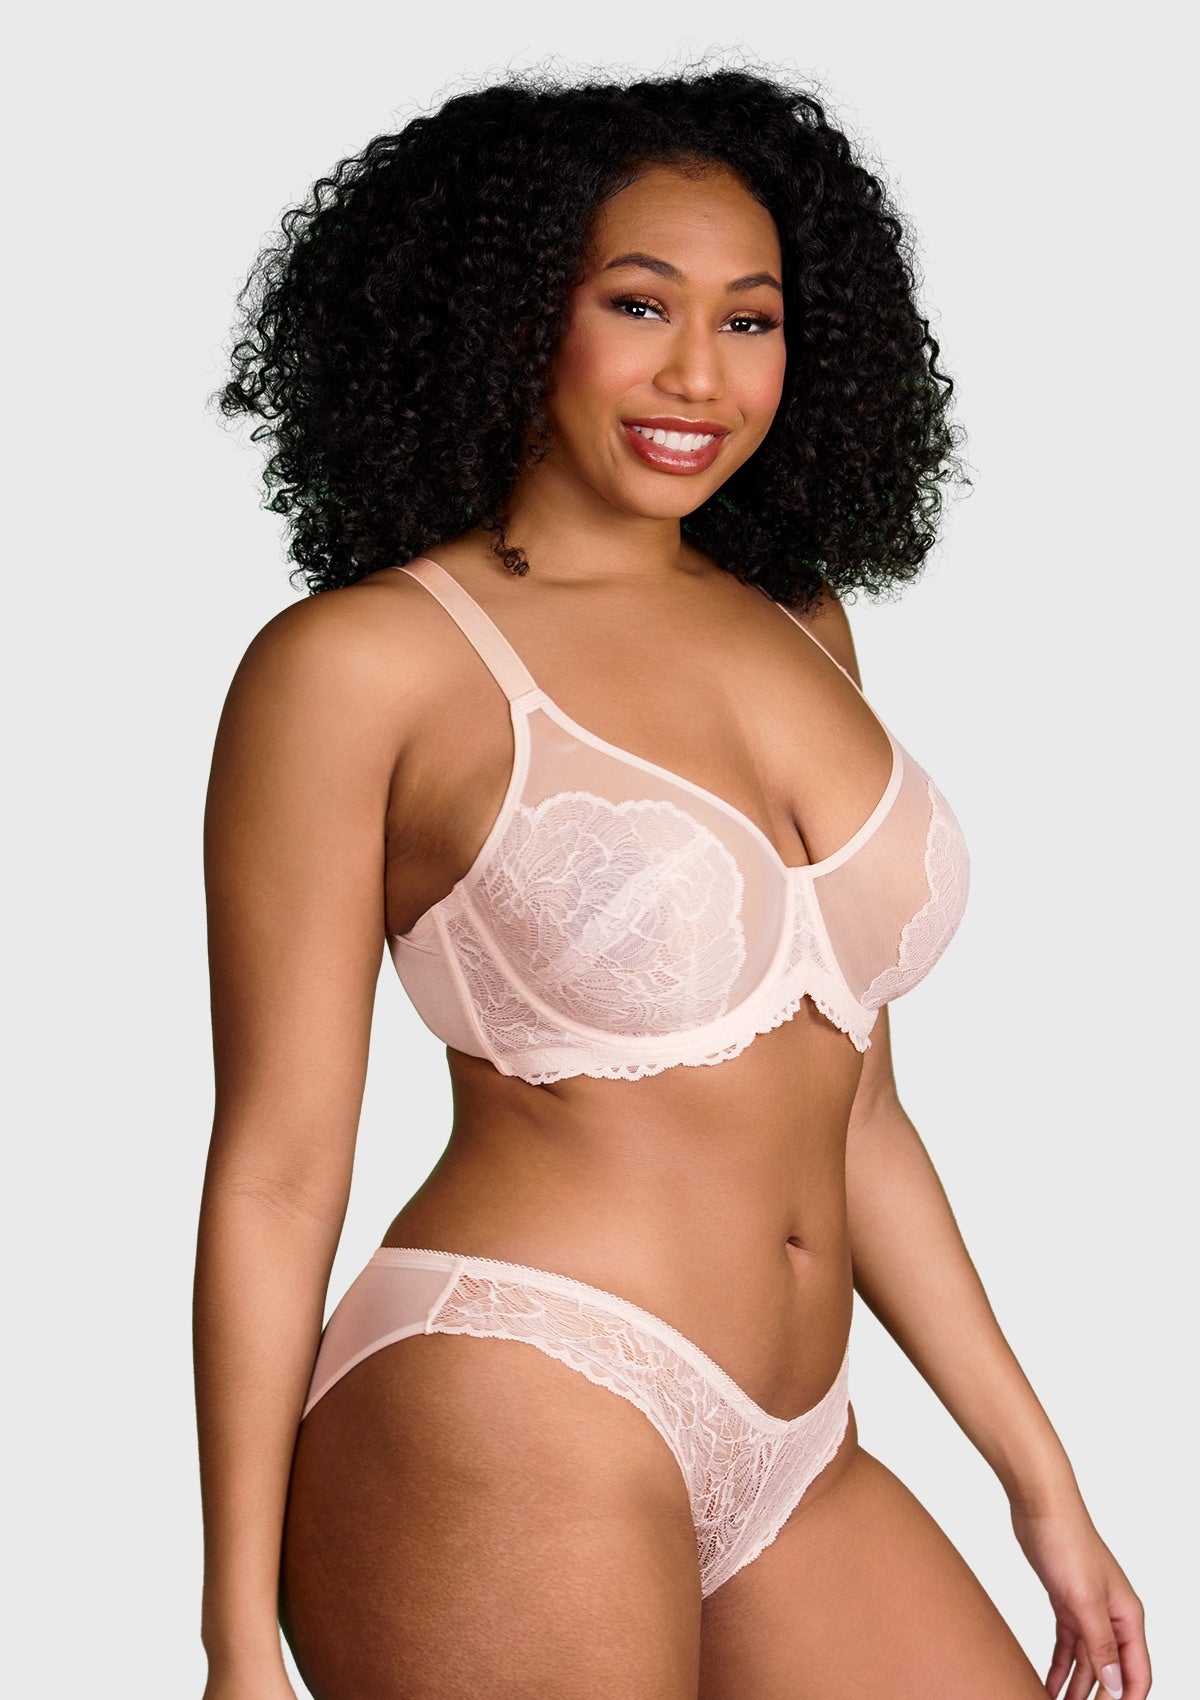 HSIA Blossom Sheer Lace Bra: Comfortable Underwire Bra For Big Busts - Dusty Peach / 42 / C